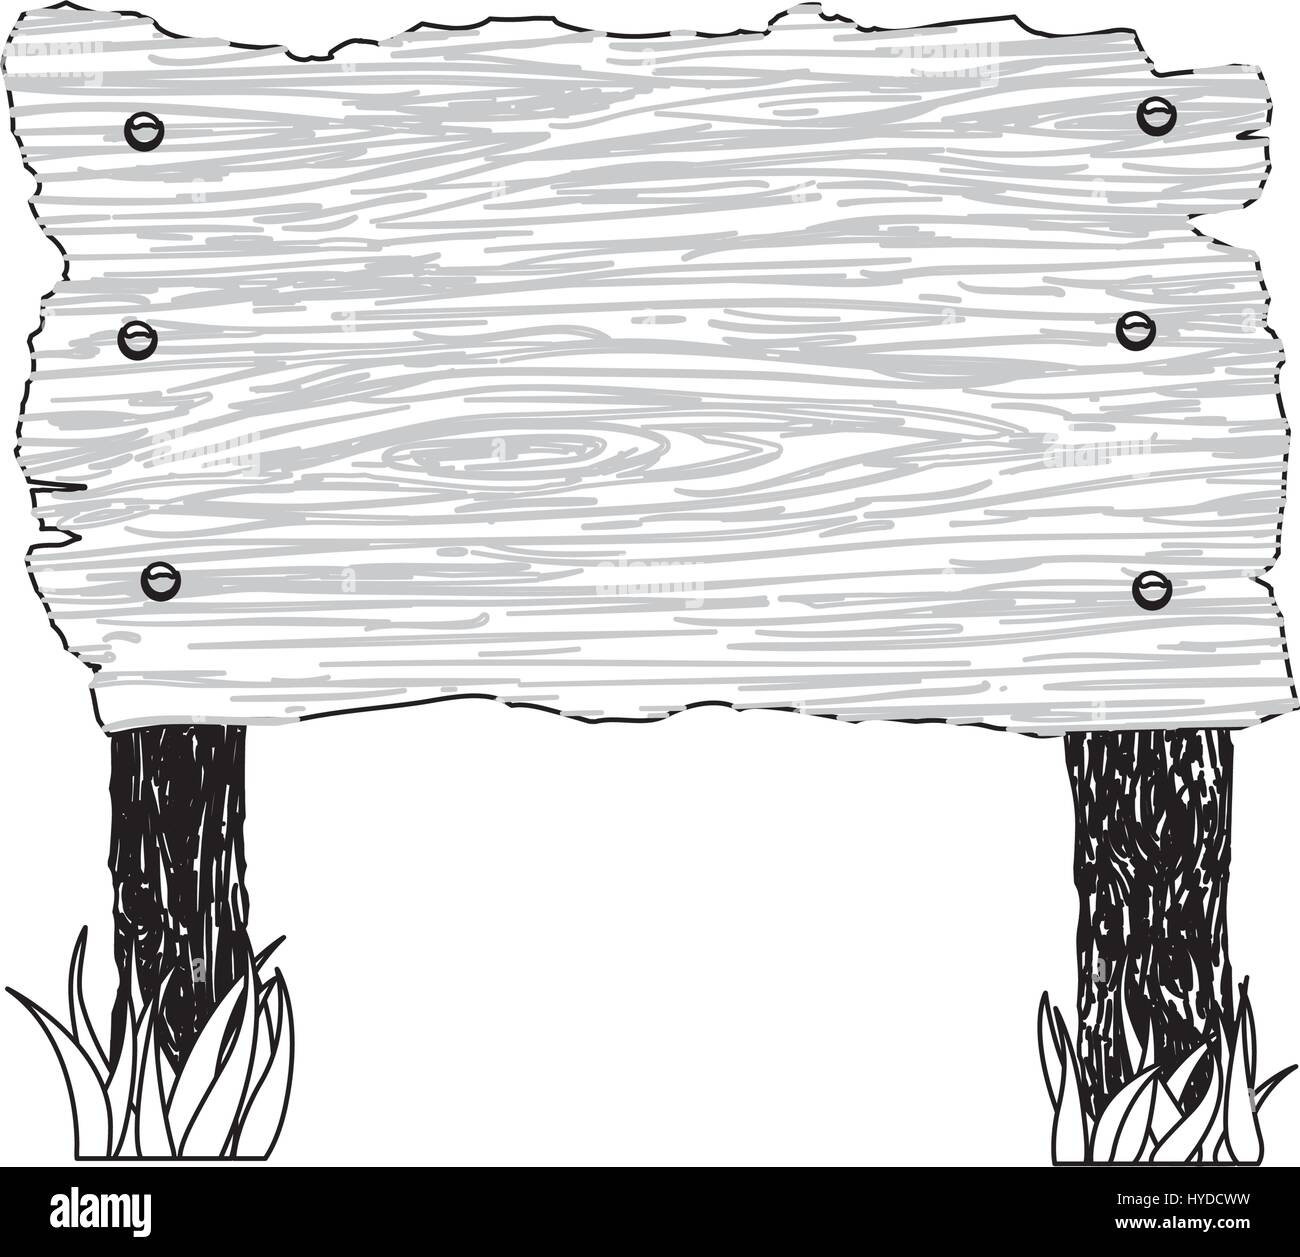 wood plank sign clipart